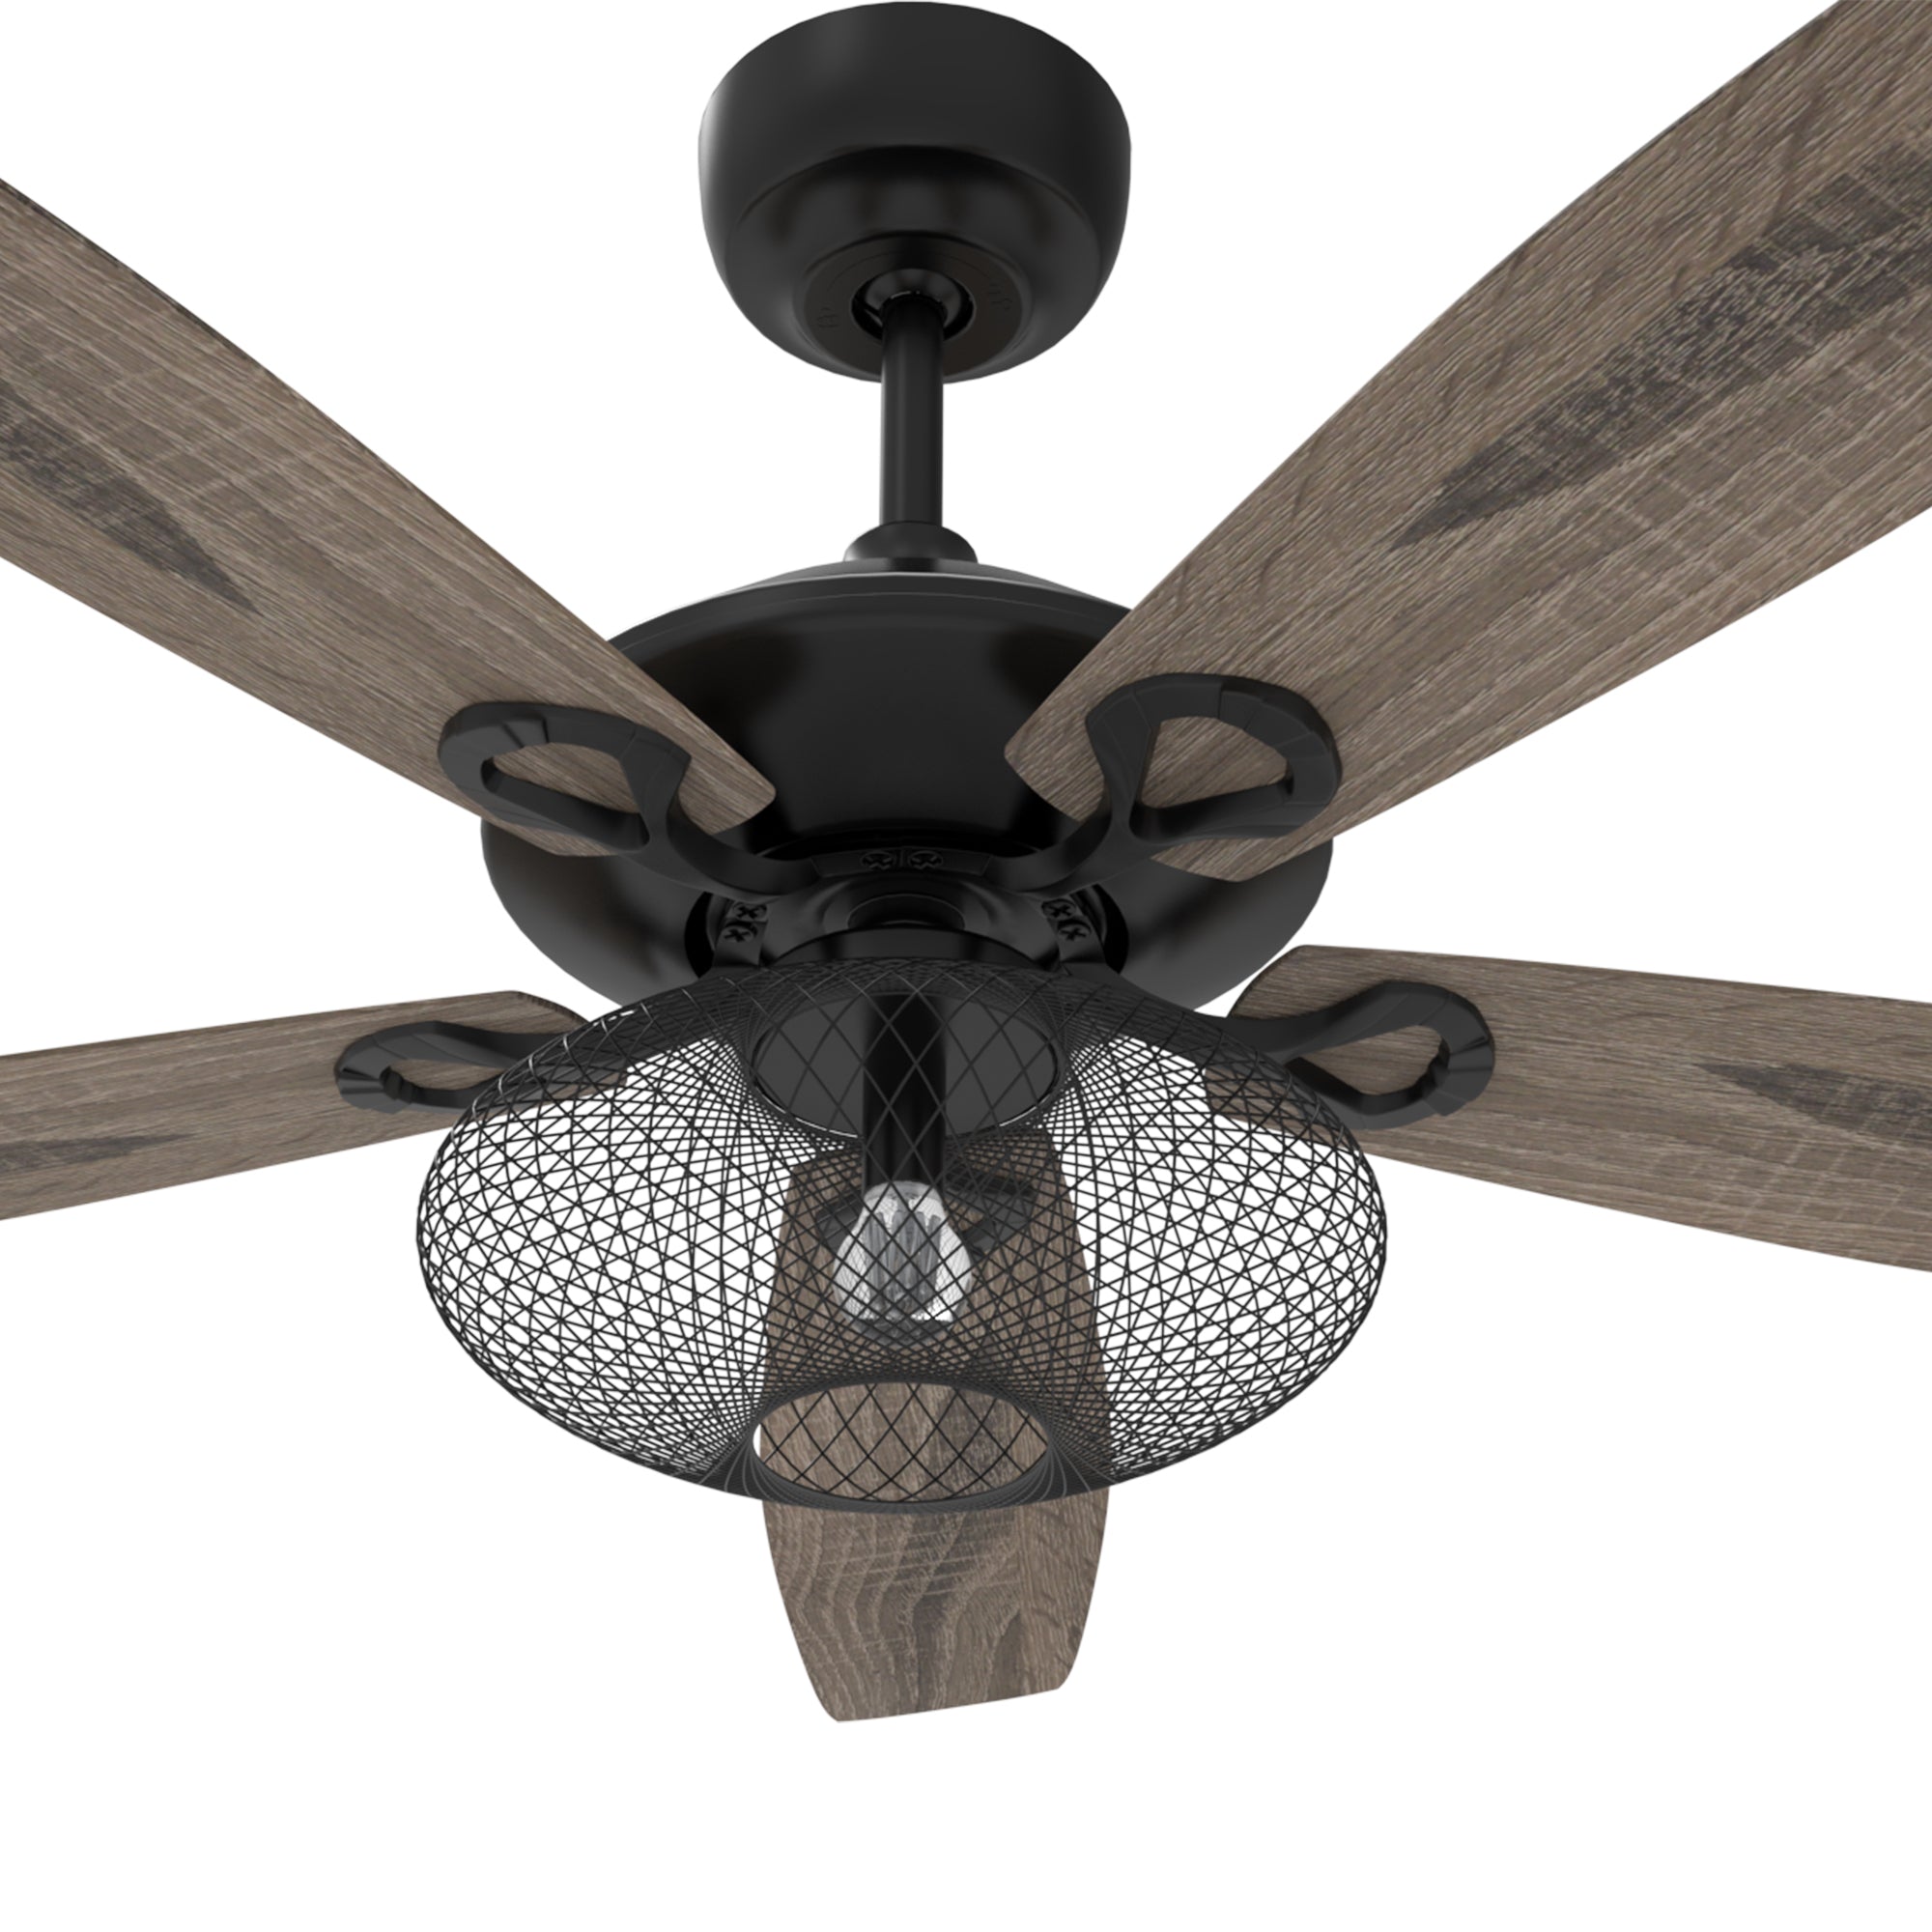 This Smafan Keller 52''ceiling fan keeps your space cool, bright, and stylish. It is a soft modern masterpiece perfect for your large indoor living spaces. This ceiling fan is a simplicity designing with black finish, use elegant Plywood blades and compatible with LED bulb(Not included). The fan features remote control.